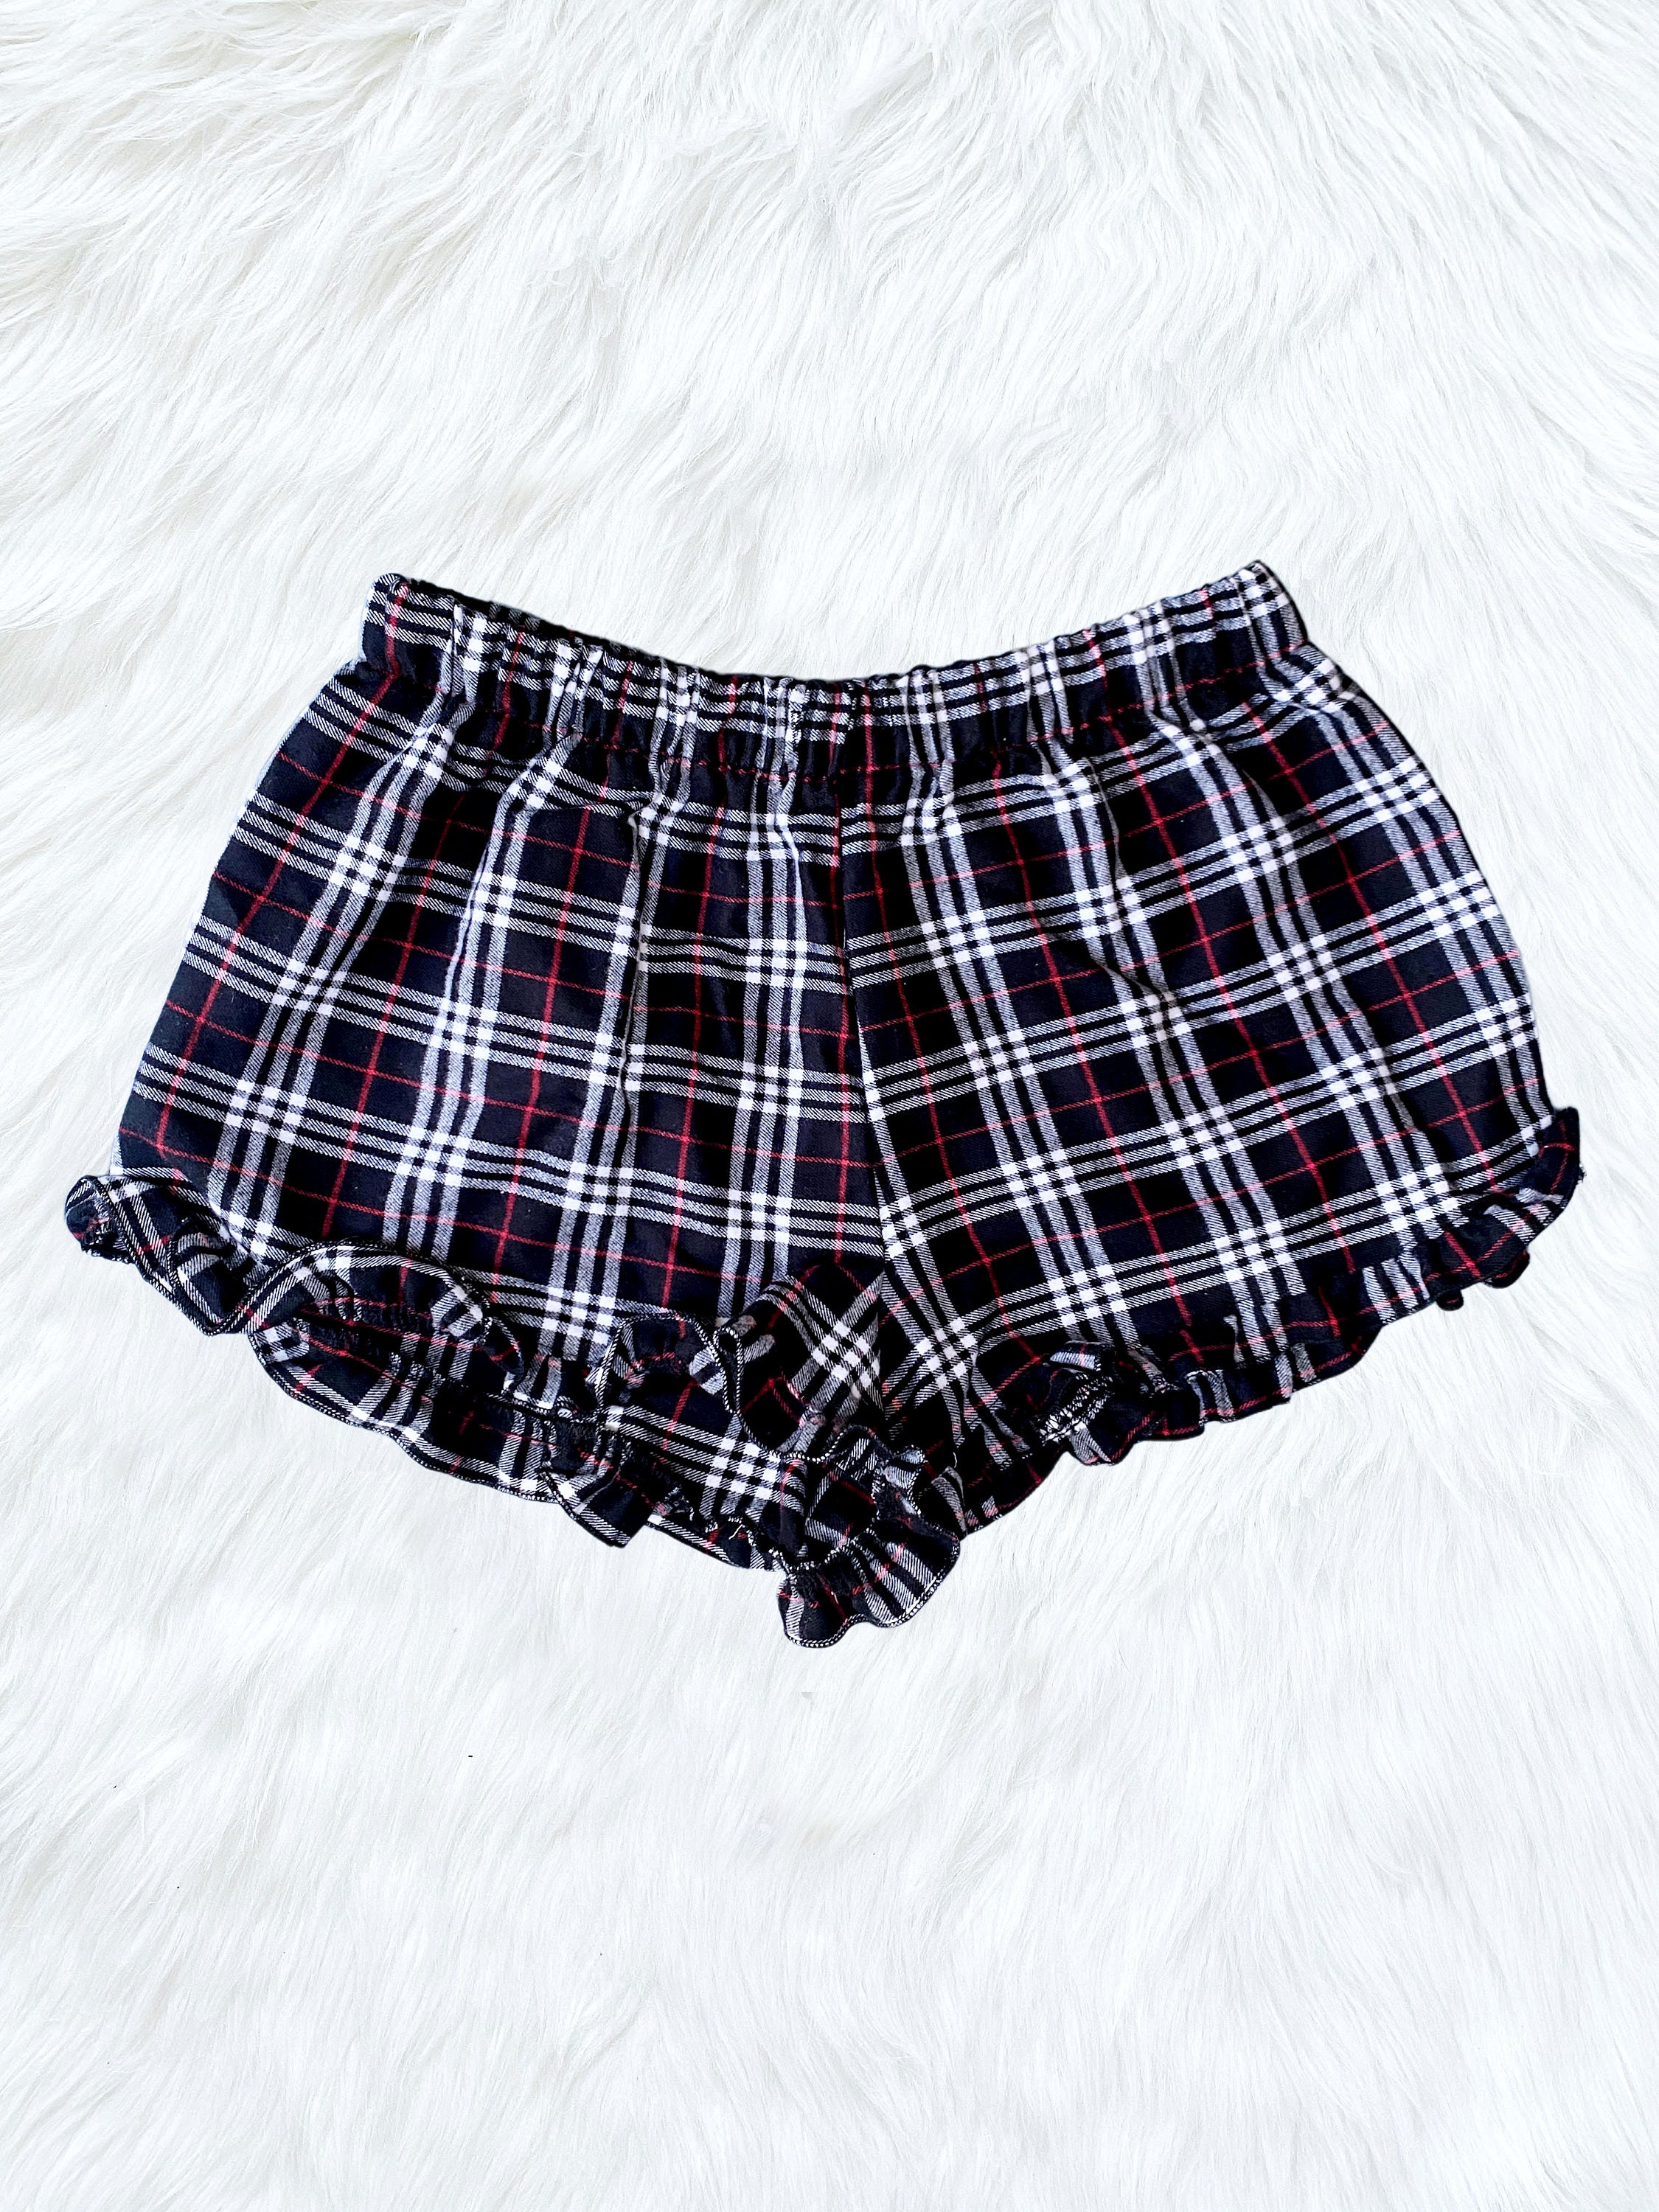 Classic Black Pyjama Shorts By Sheepers